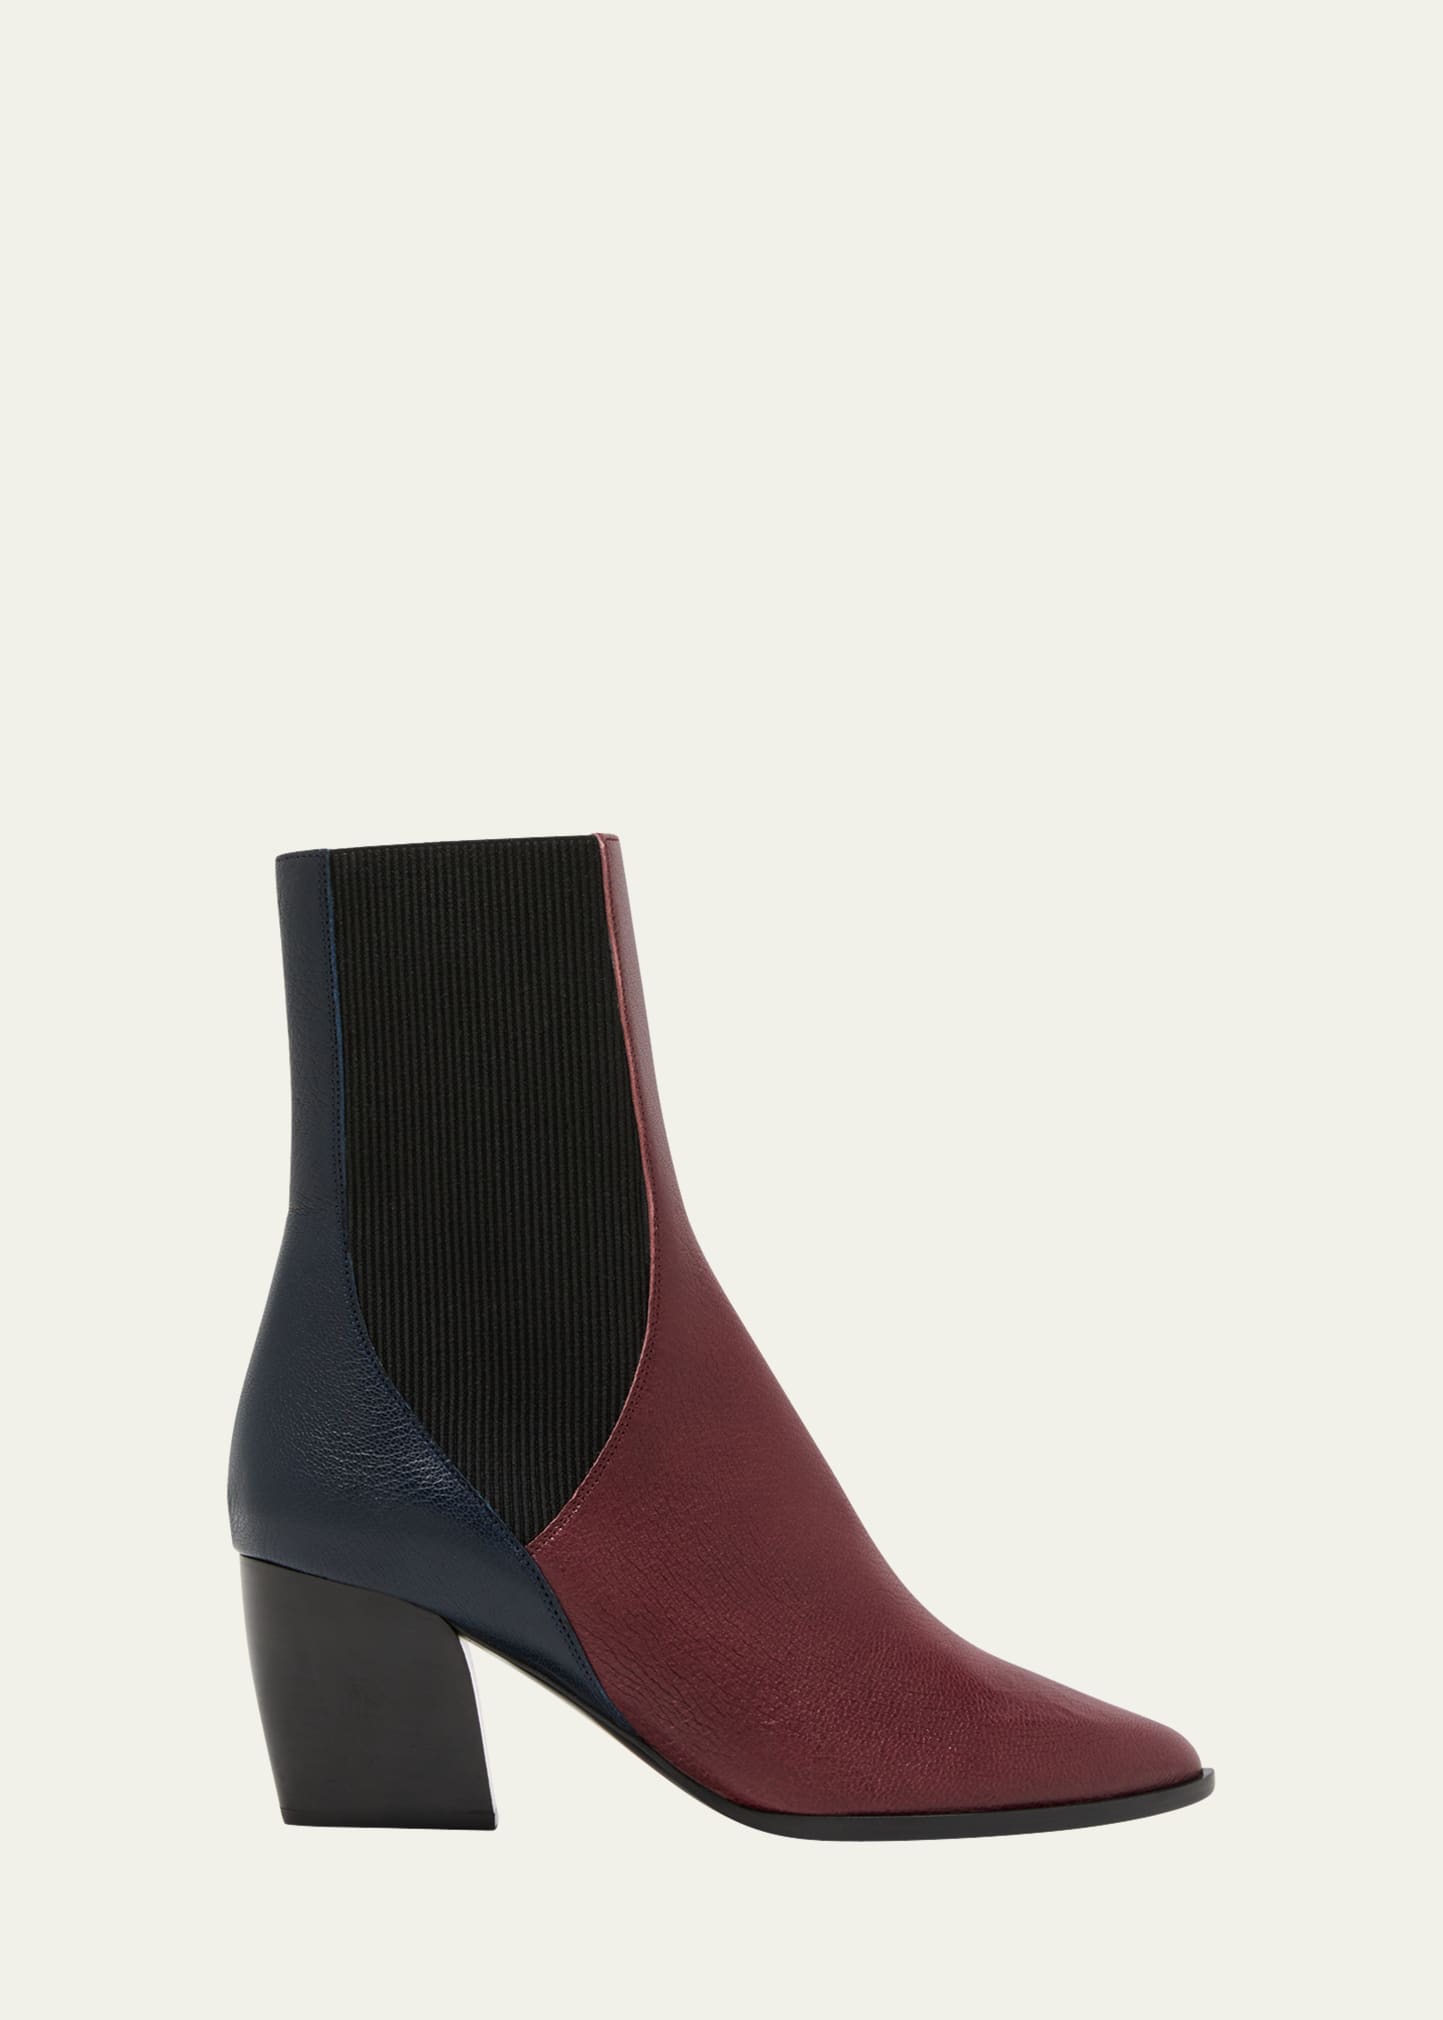 PIERRE HARDY RIDE BICOLOR CHELSEA ANKLE BOOTS